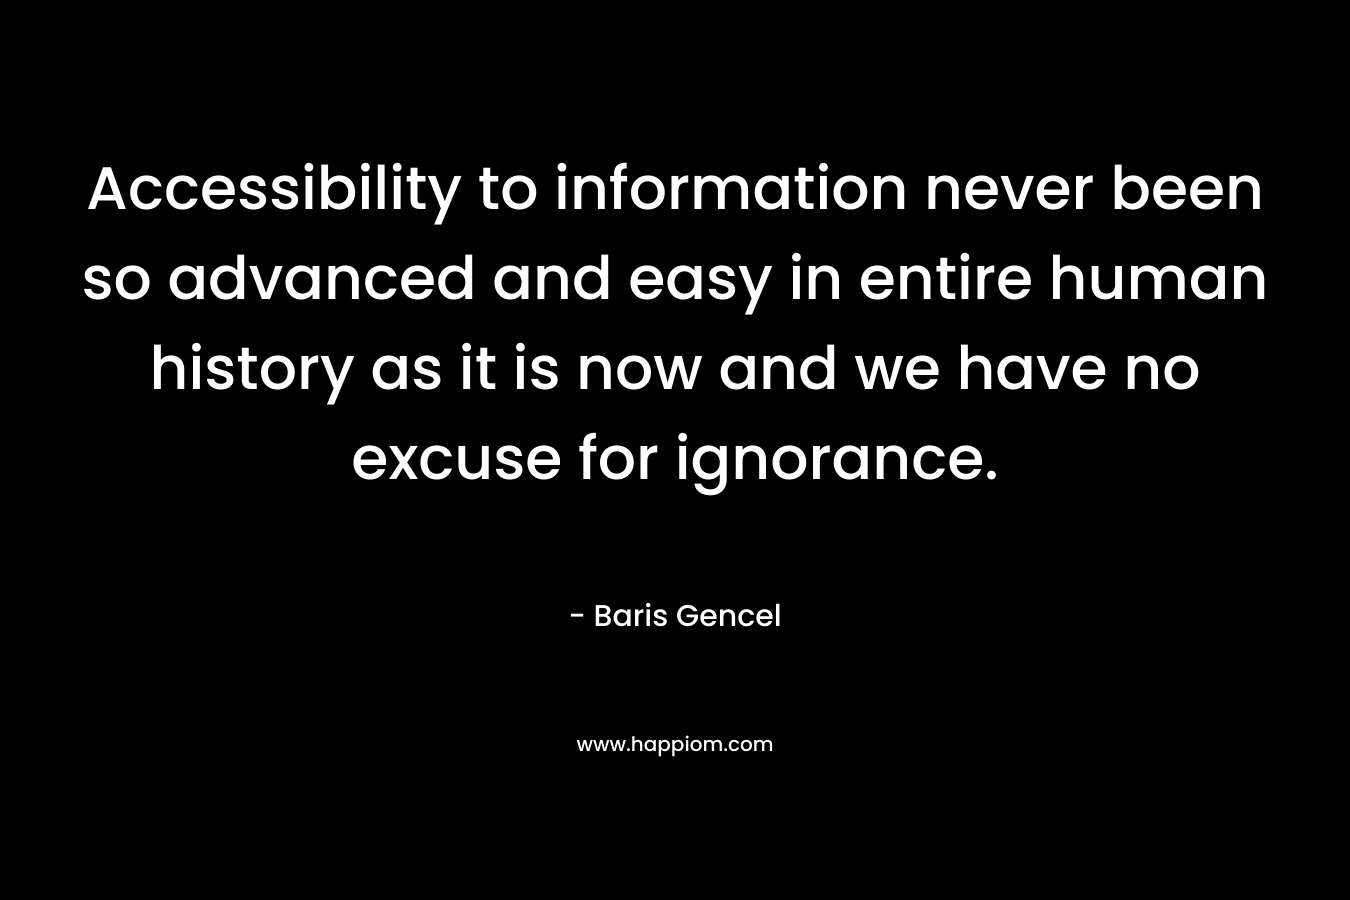 Accessibility to information never been so advanced and easy in entire human history as it is now and we have no excuse for ignorance.